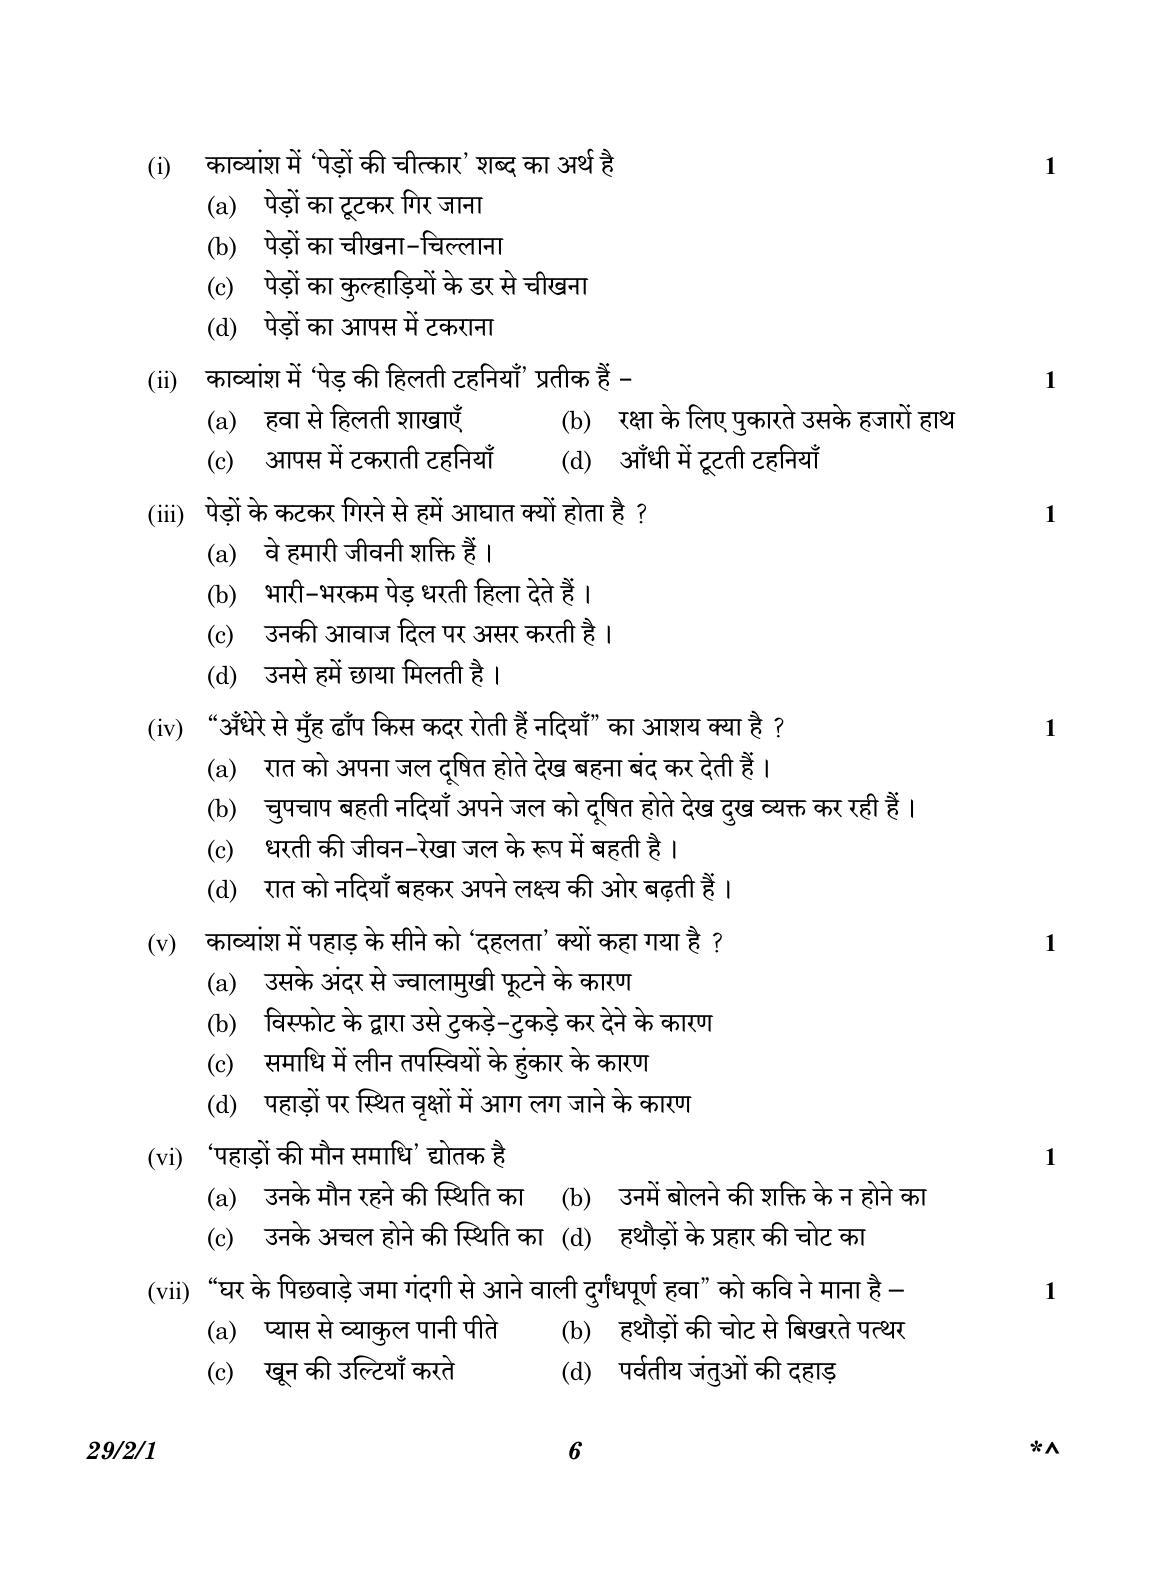 CBSE Class 12 29-2-1 Hindi Elective 2023 Question Paper - Page 6